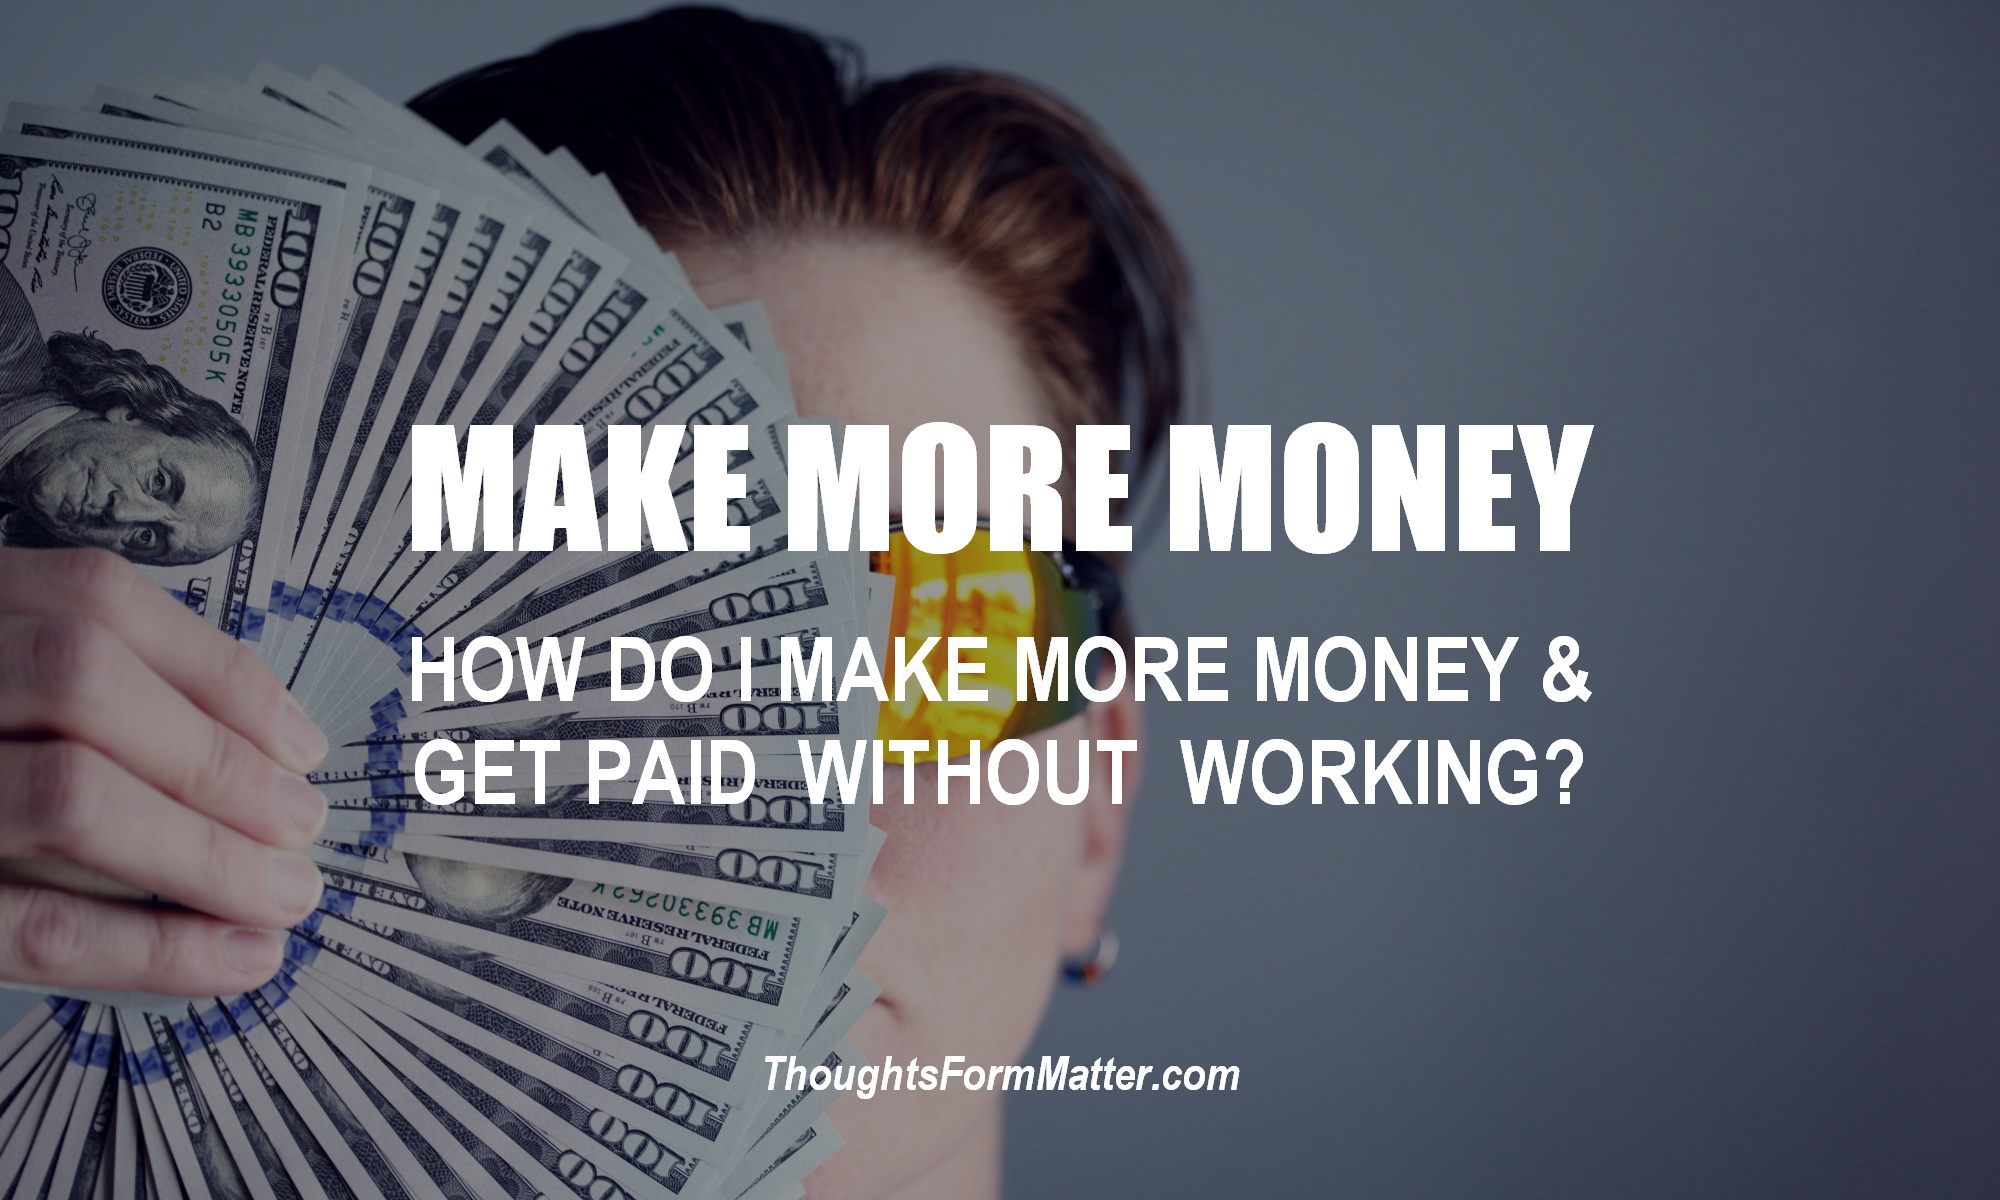 How do I make more money and get paid without working? Man with hundred dollar bills tells you how.